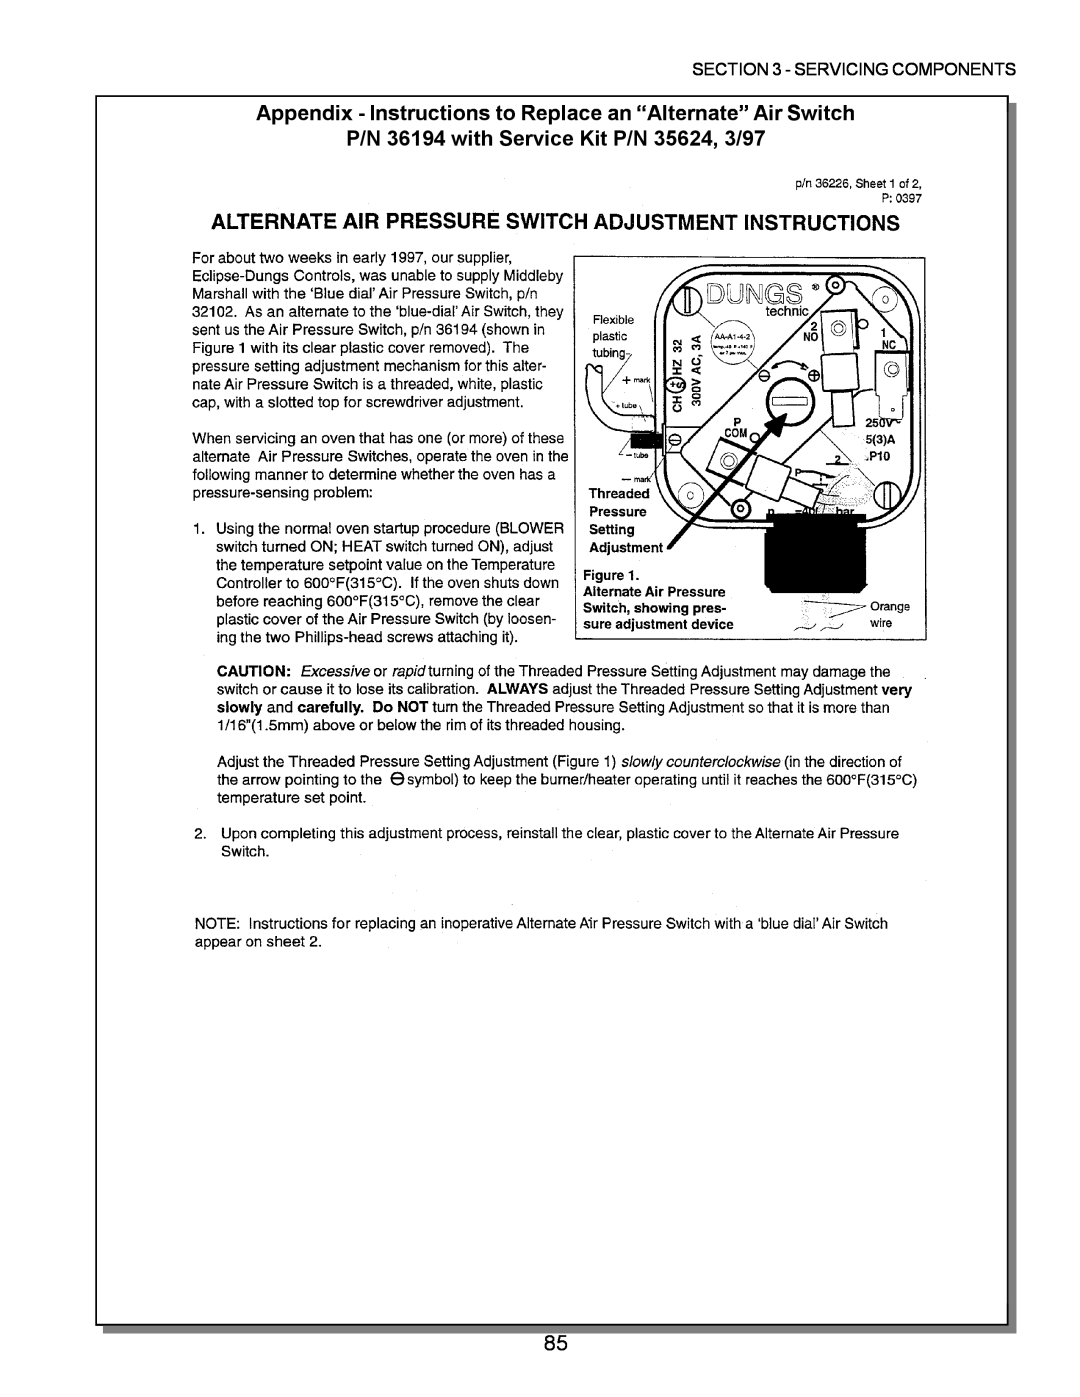 Middleby Marshall PS200, PS570, PS360 Appendix - Instructions to Replace an “Alternate” Air Switch, Servicing Components 